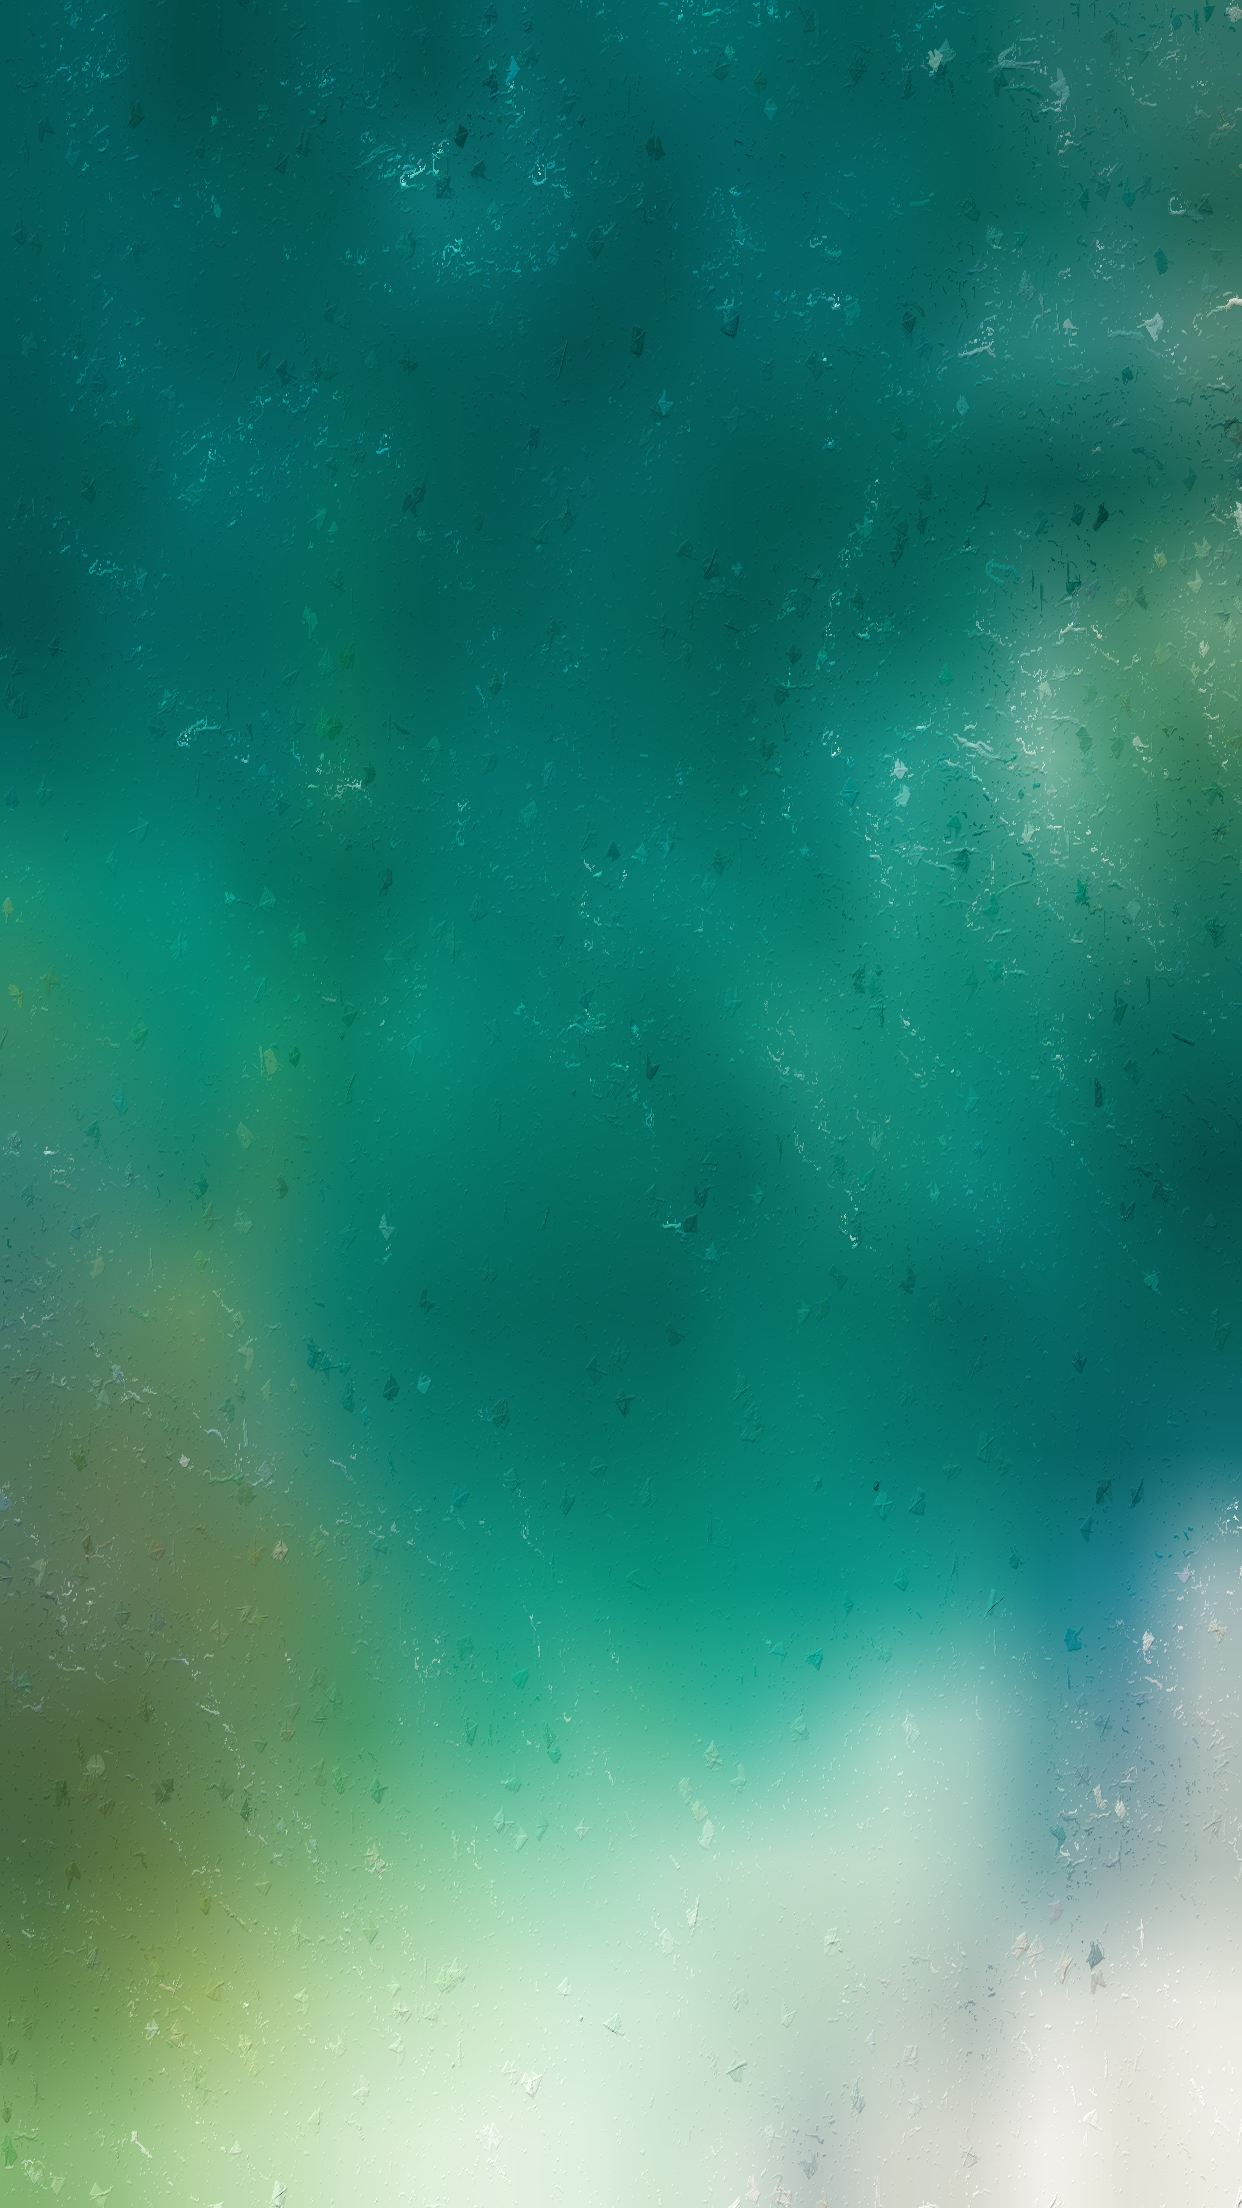 Wallpapers inspired by iOS 10 and the new Home app